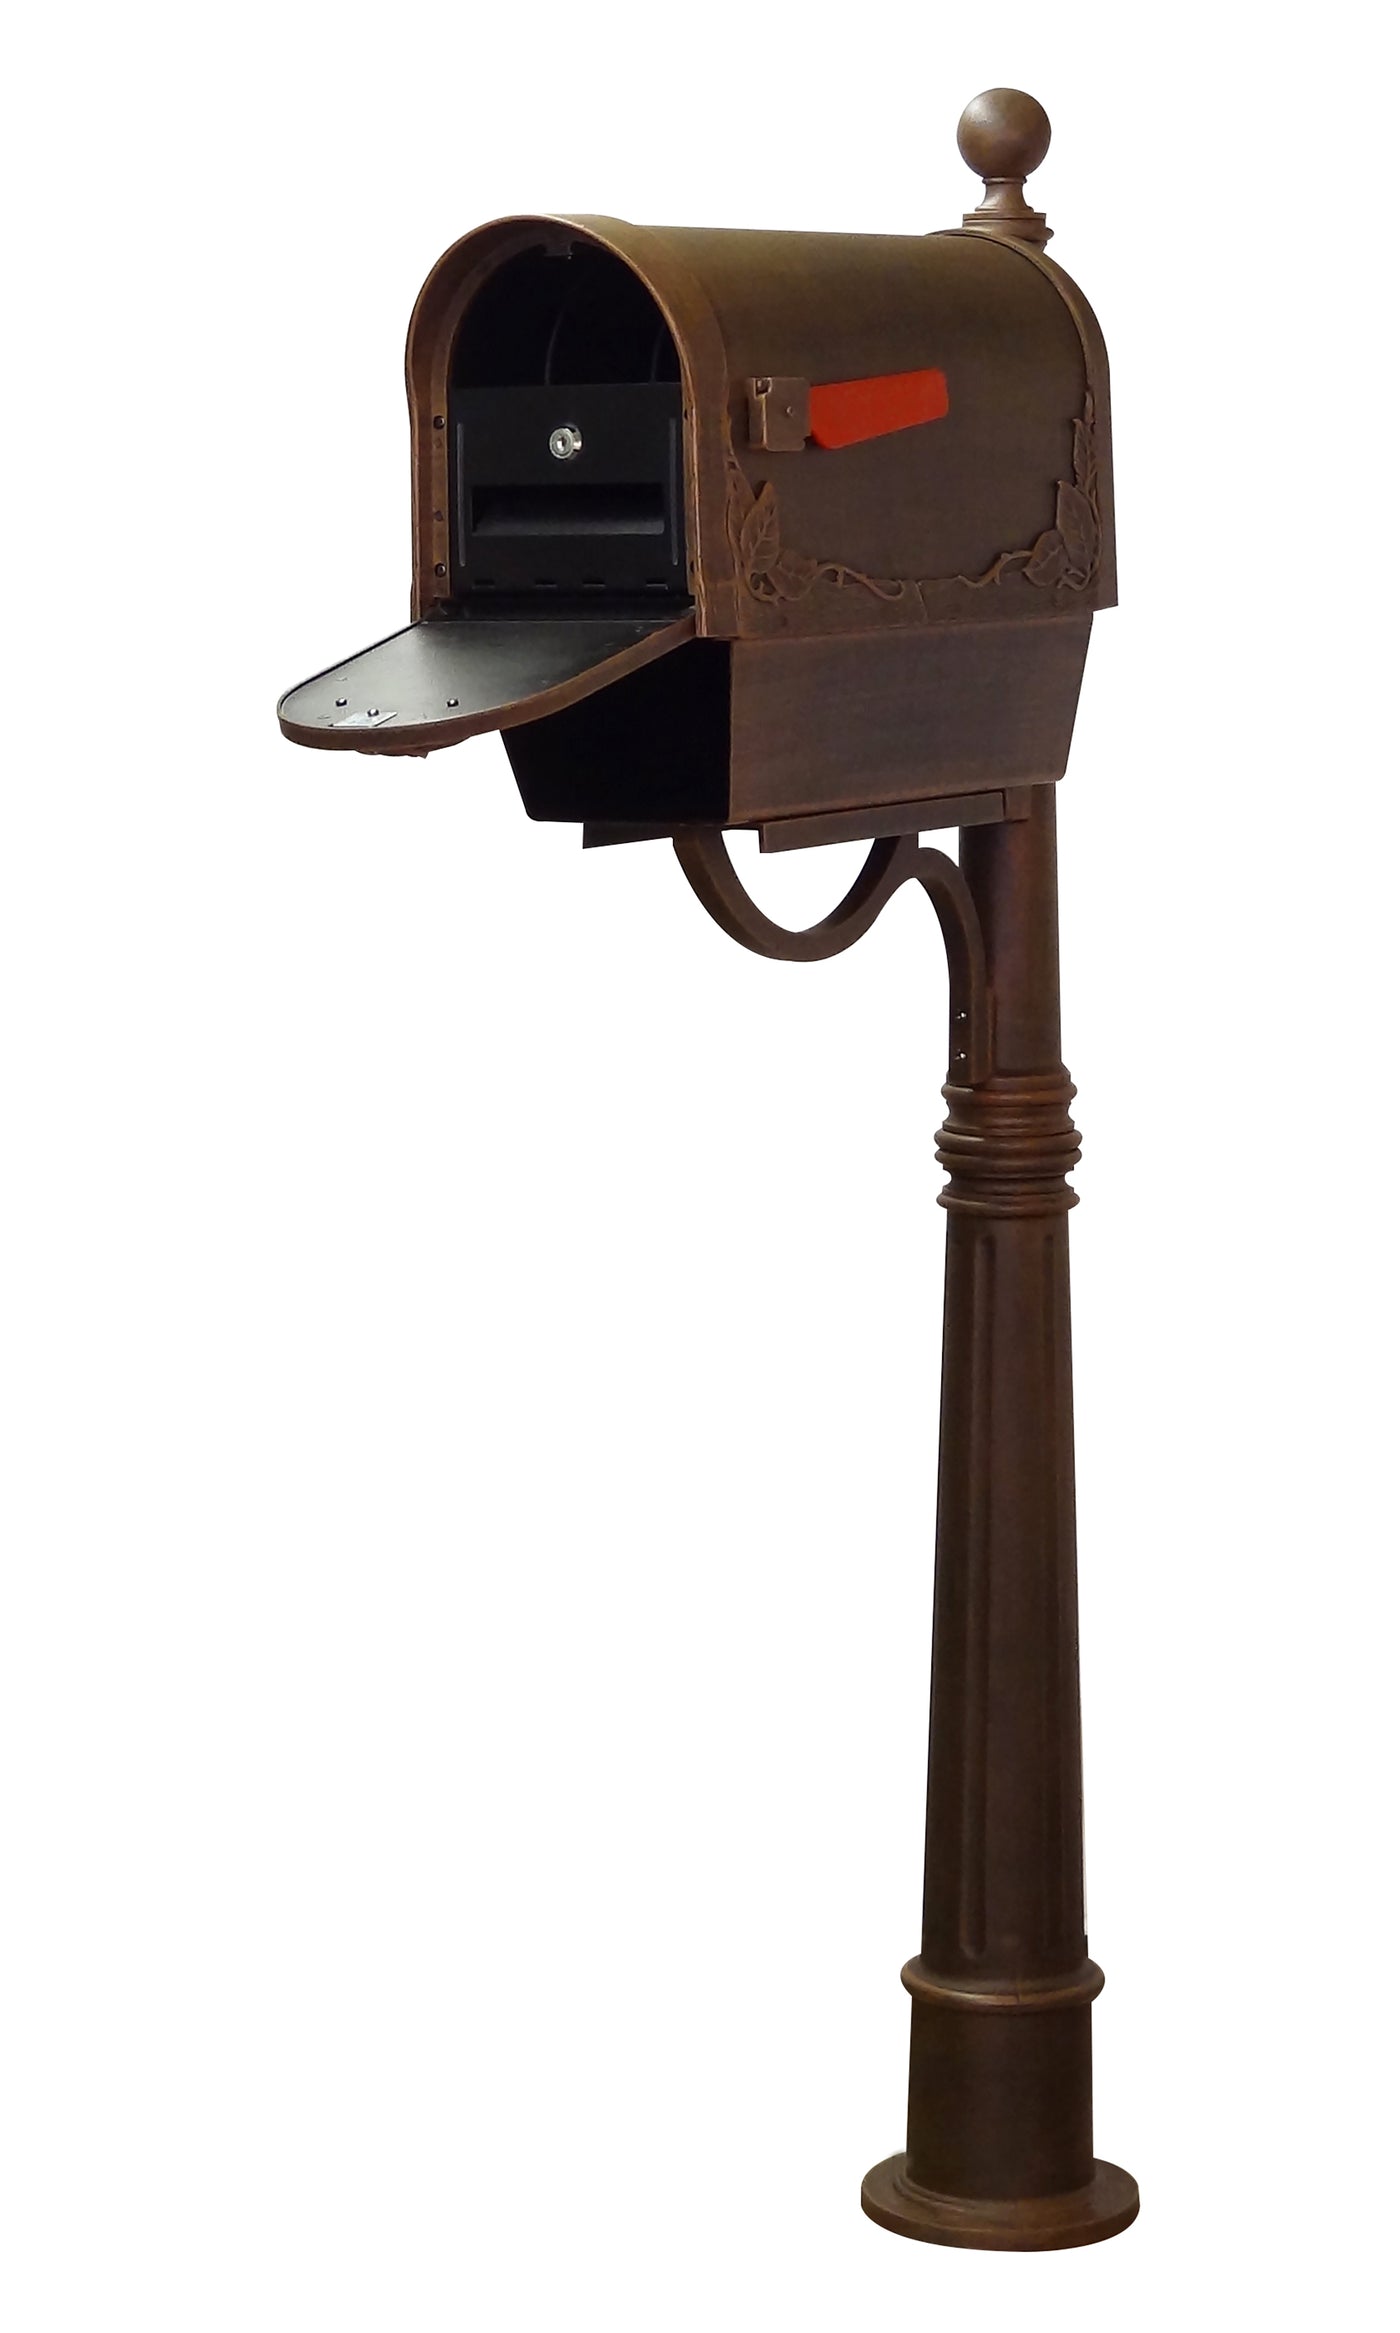 Floral Curbside Mailbox with Newspaper Tube, Locking Insert and Ashland Mailbox Post